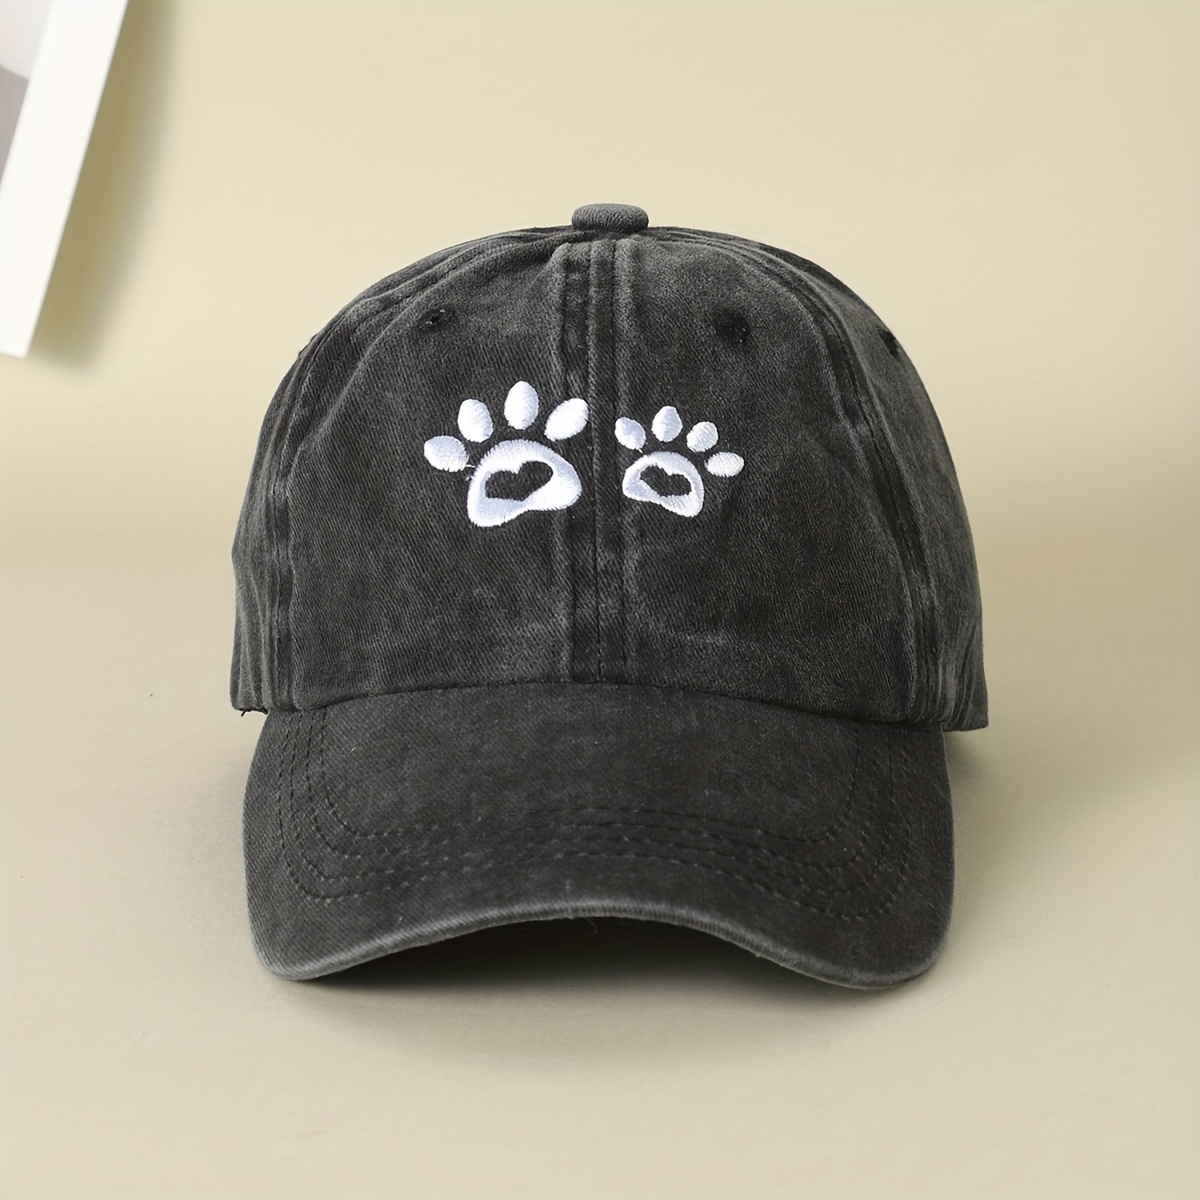 

Paw Print Embroidery Baseball Cap Gray Washed Distressed Dad Hats Lightweight Adjustable Sun Hat